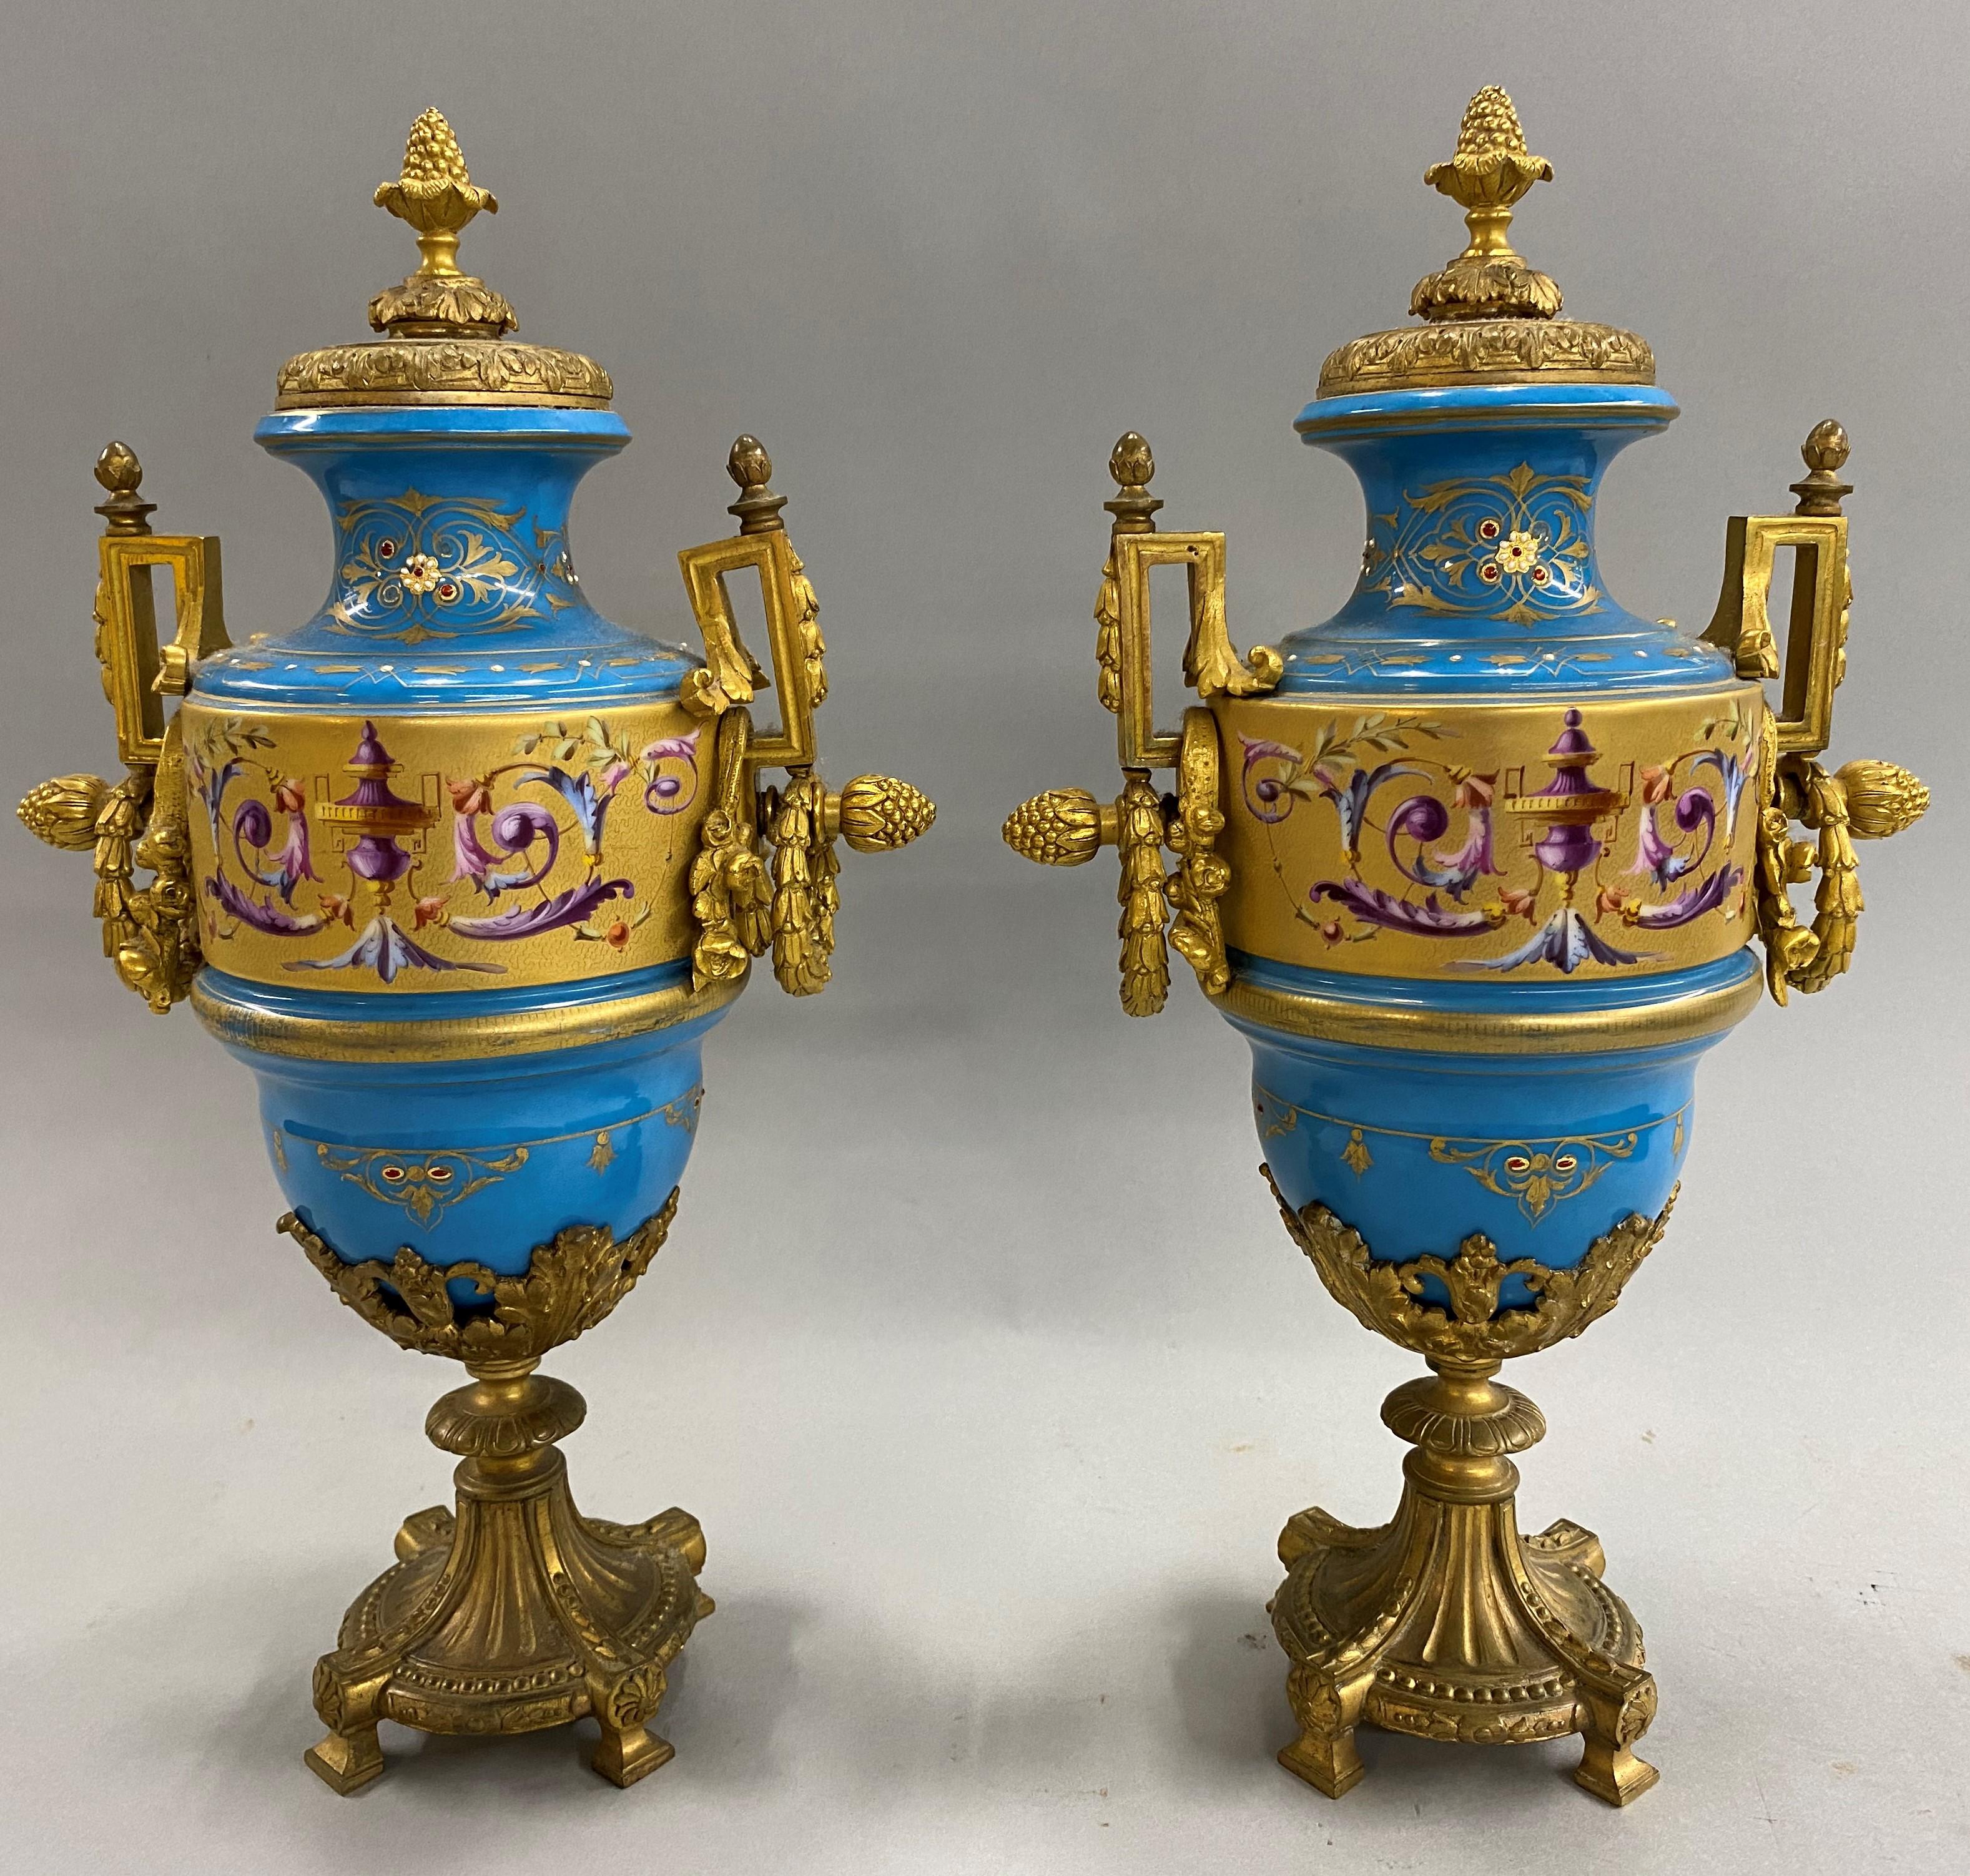 19th Century Pair of French Sevres Celeste Blue Porcelain Urns with Gilt Ormolu 6